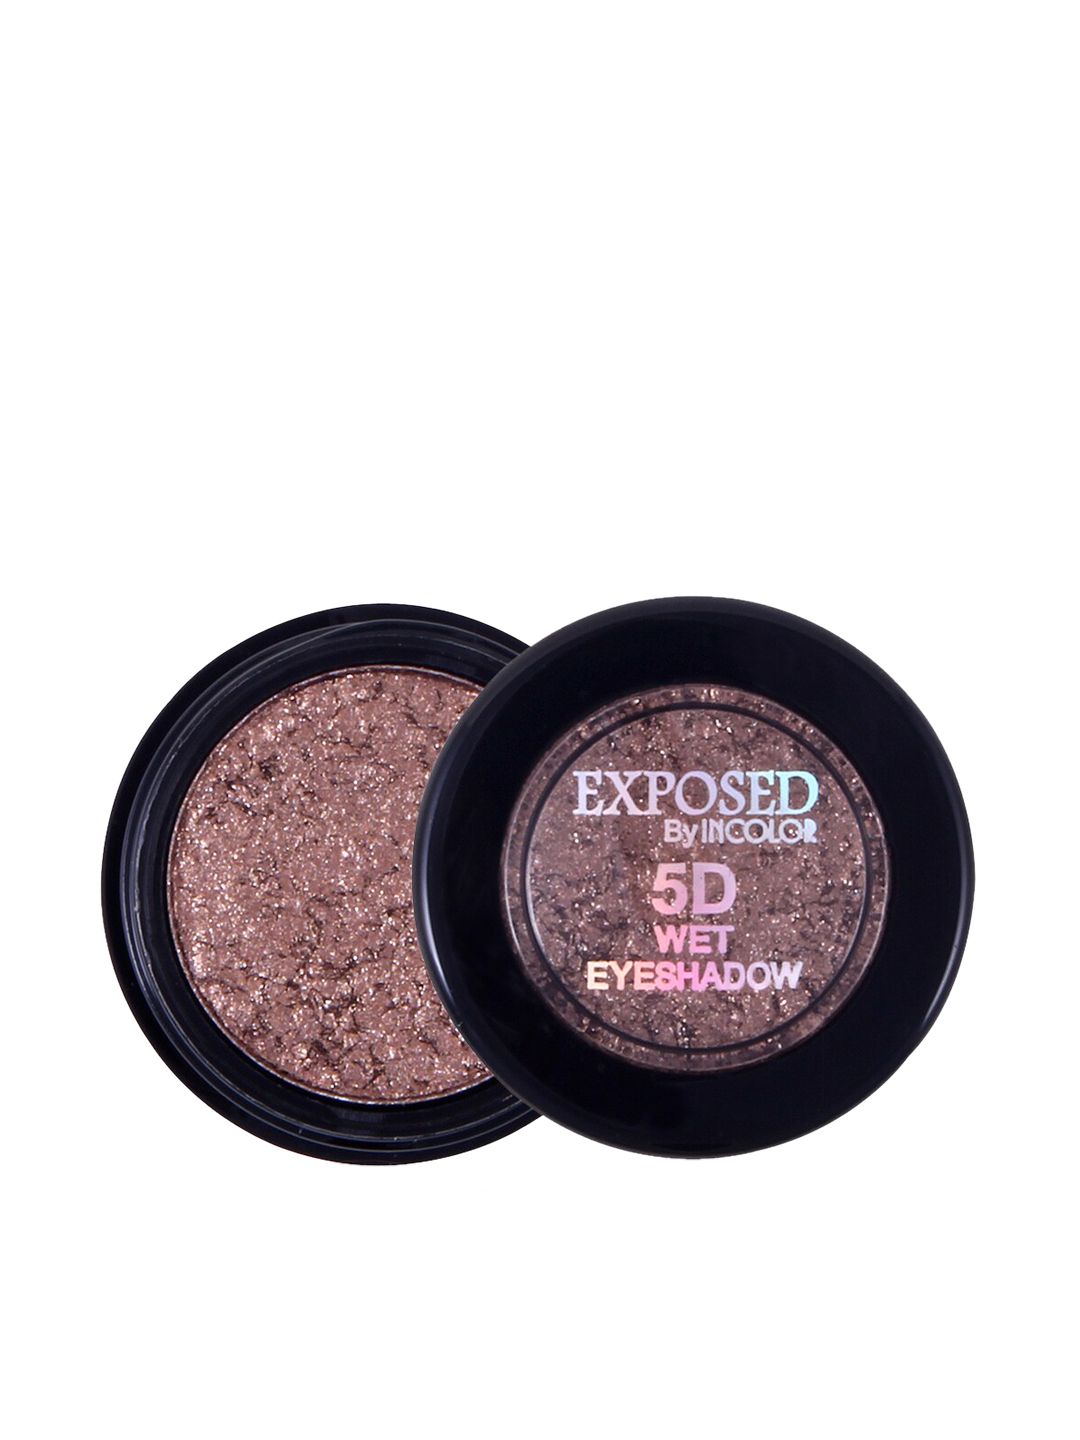 INCOLOR 5D Wet Eyeshadow 20 Price in India